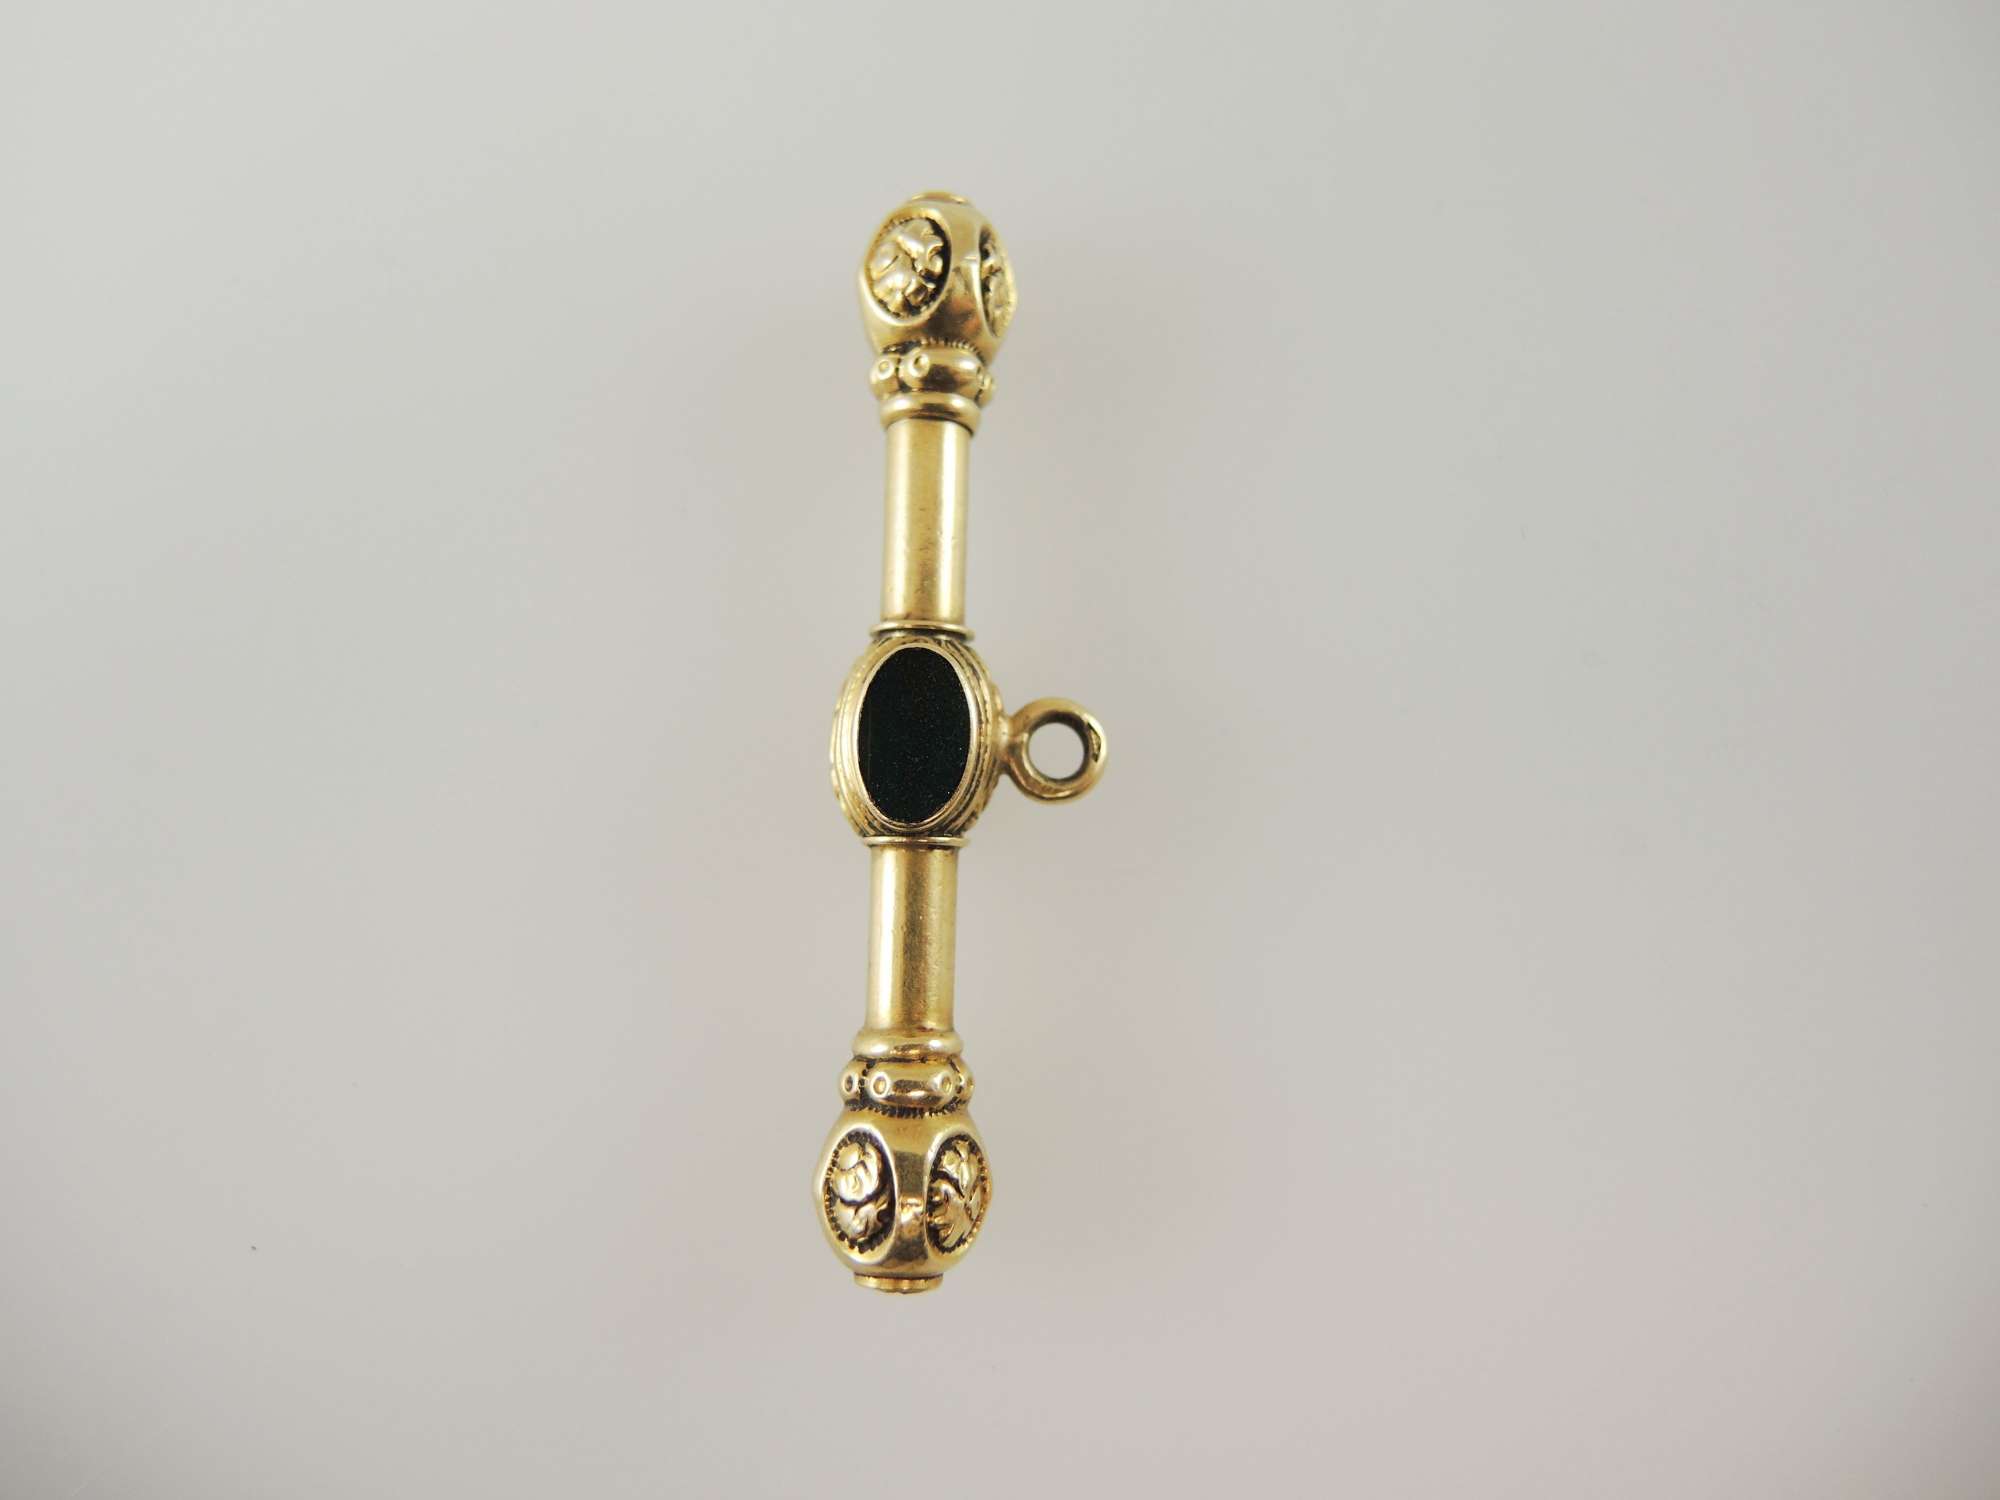 Gold and Stone Set Retractable T bar pocket watch key c1850